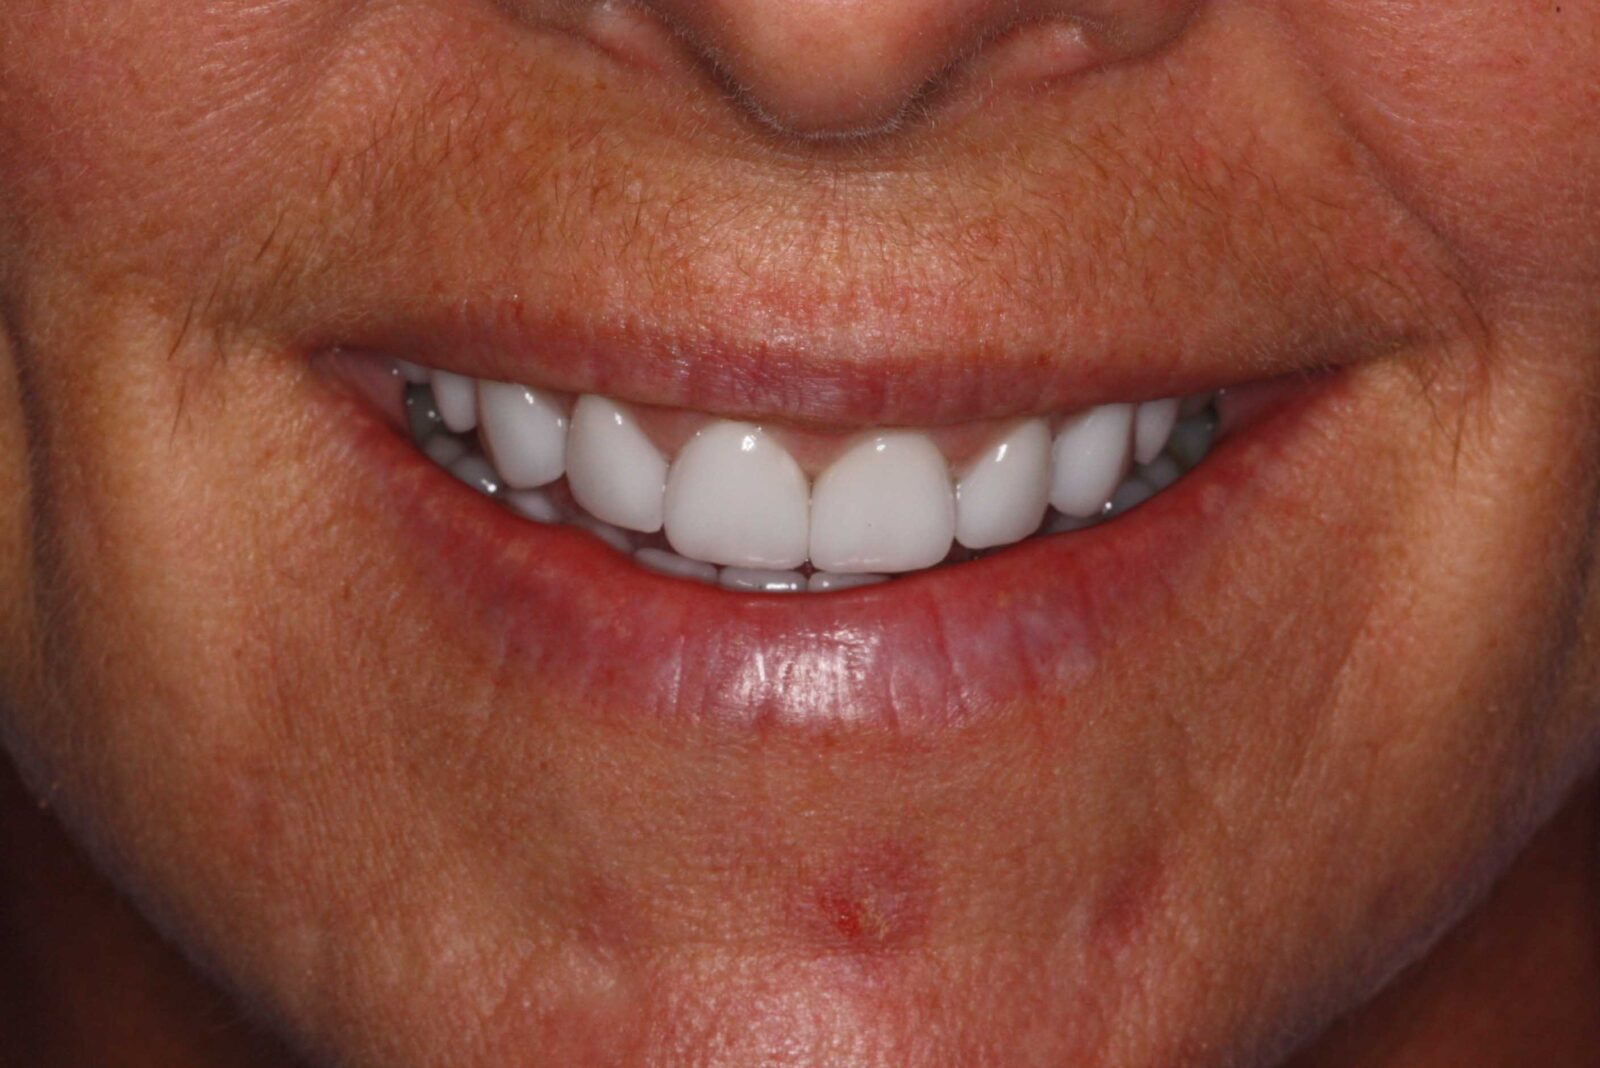 Client's teeth after treatment